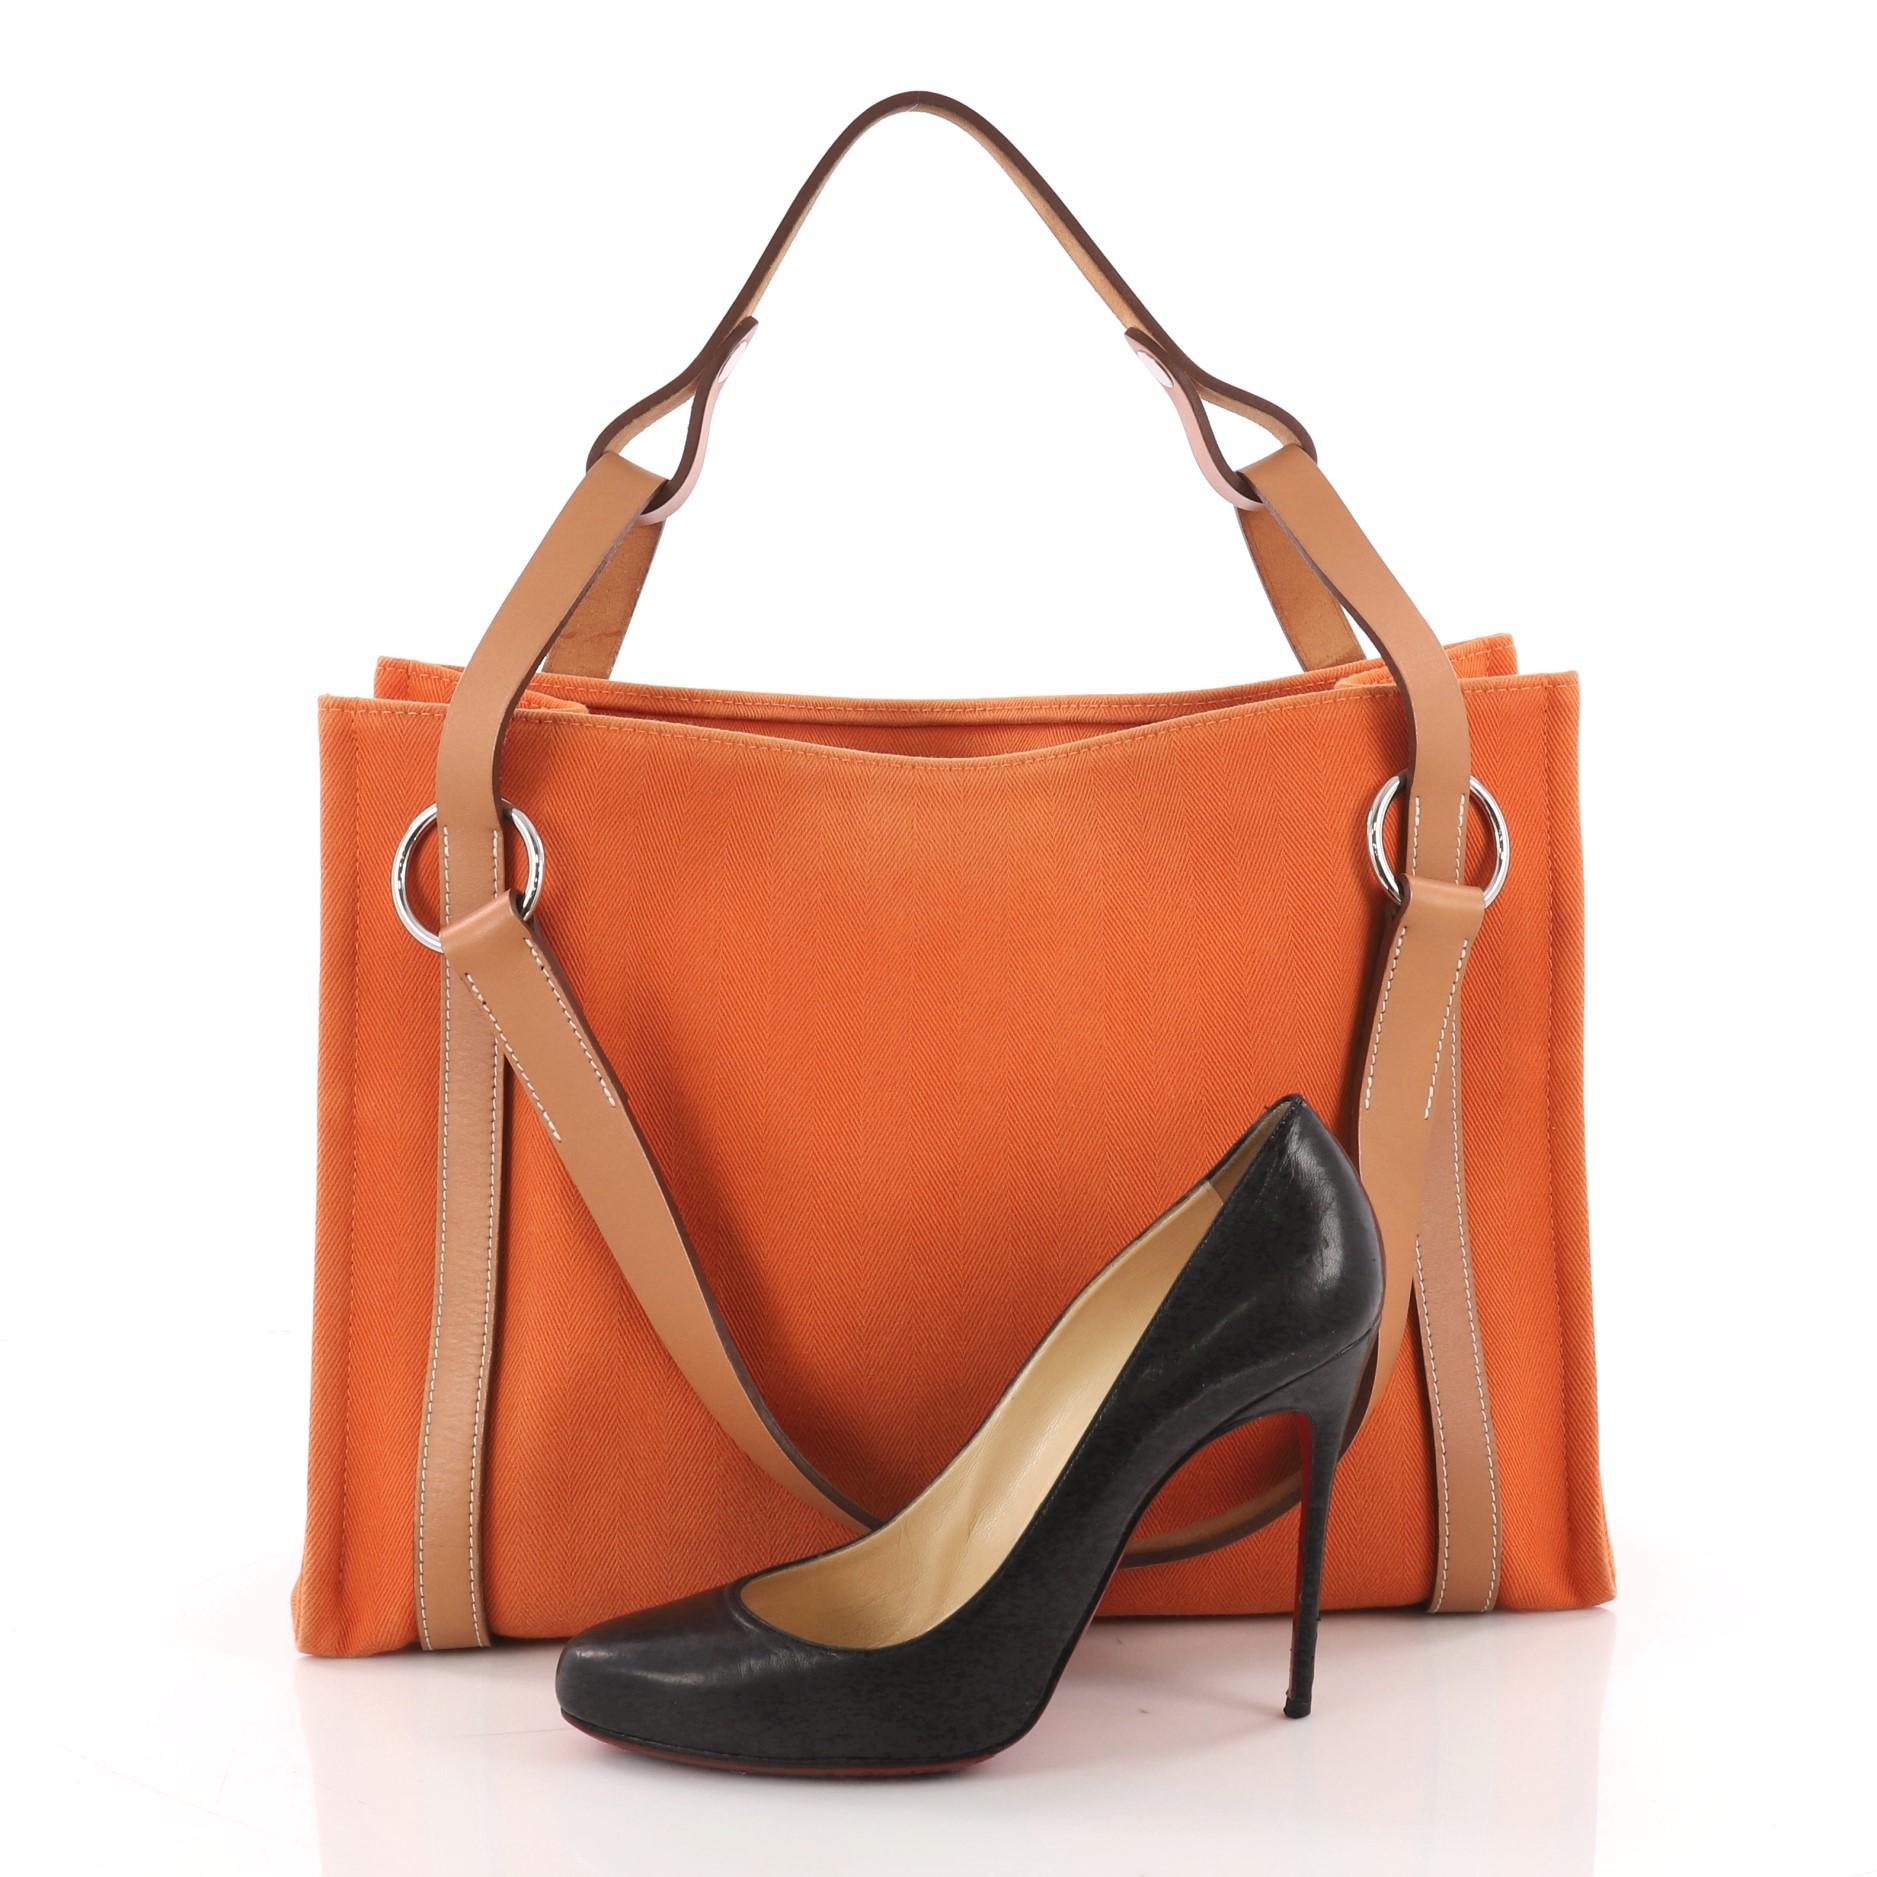 This Hermes Cabalicol Tote Toile with Leather PM, crafted from orange toile fabric, features a leather top handle, brown leather trims, and palladium-tone hardware. Its wide open top showcases an orange toile interior with side slip pockets. Date